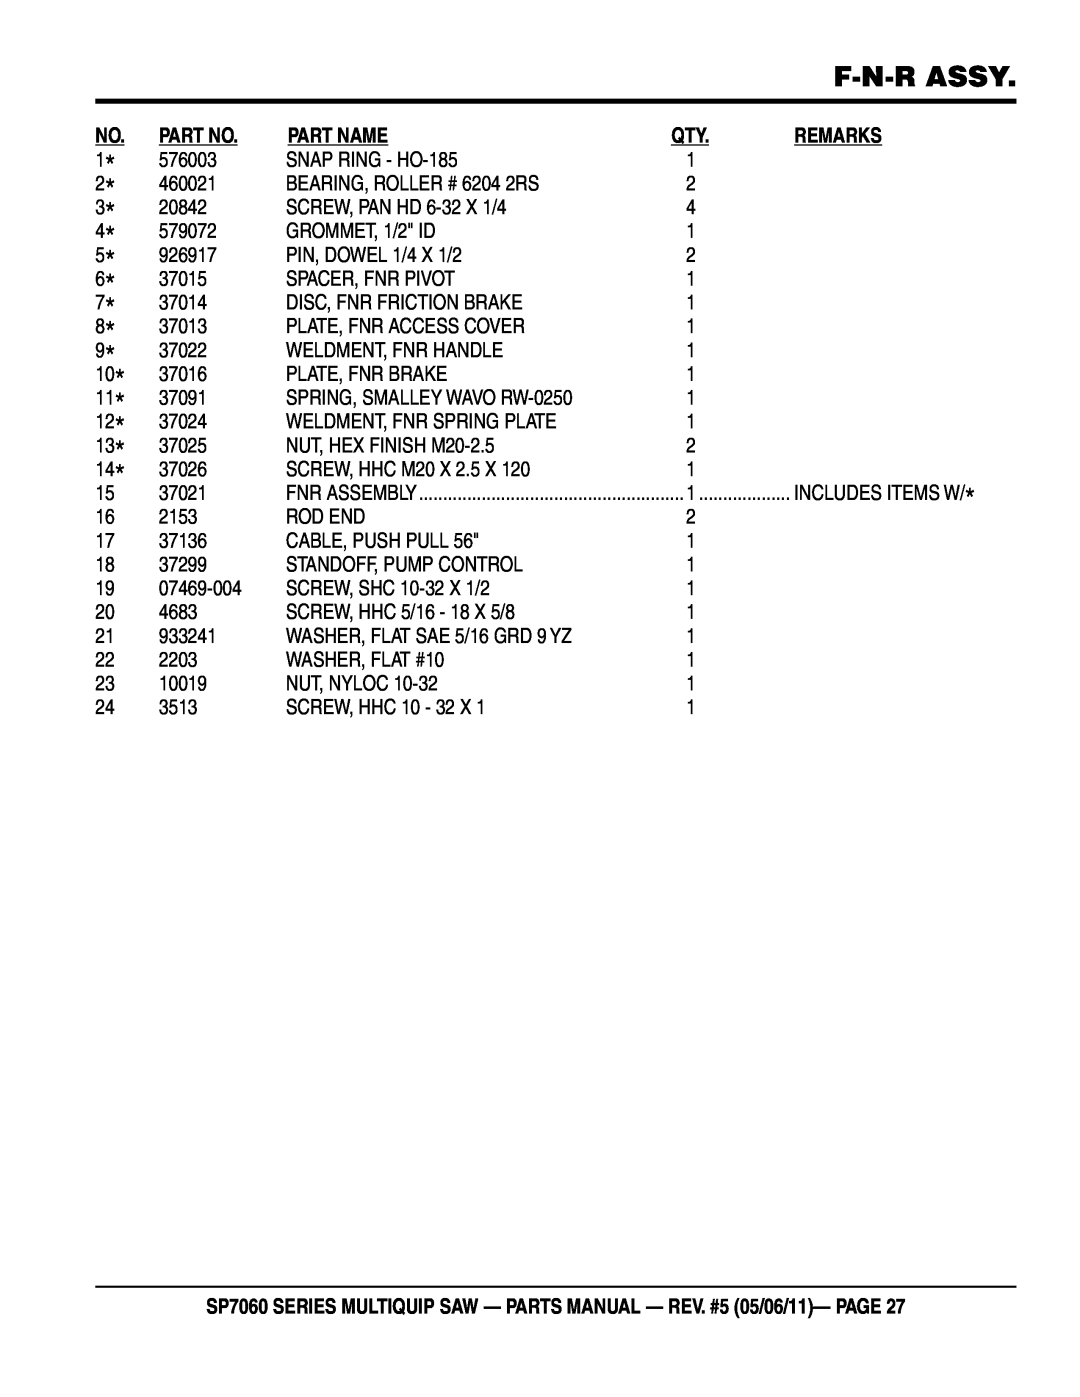 Multiquip SP706030 F-N-R Assy, Part Name, Remarks, SP7060 SERIES MULTIQUIP SAW - PARTS MANUAL - REV. #5 05/06/11- PAGE 